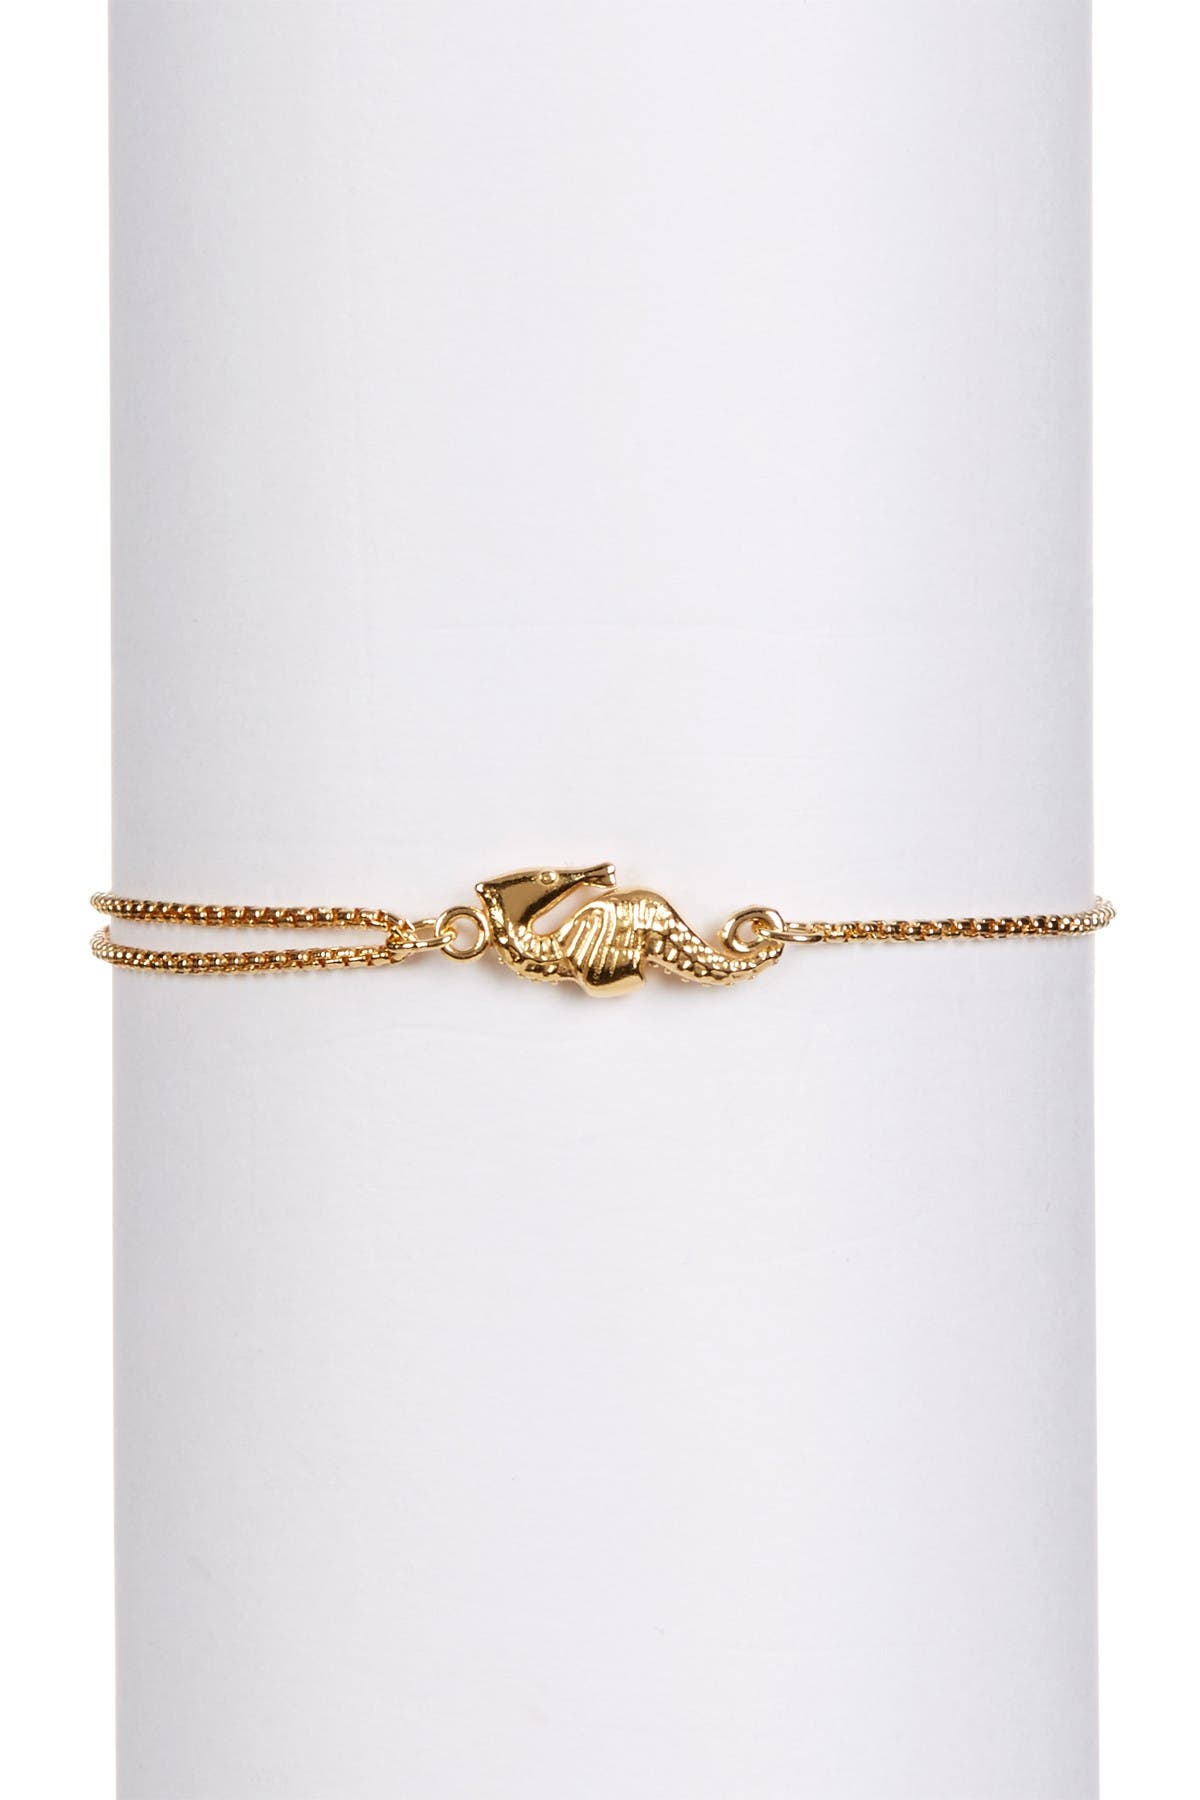 Alex And Ani 14k Yellow Gold Plated Sterling Silver Seahorse Chain Bracelet